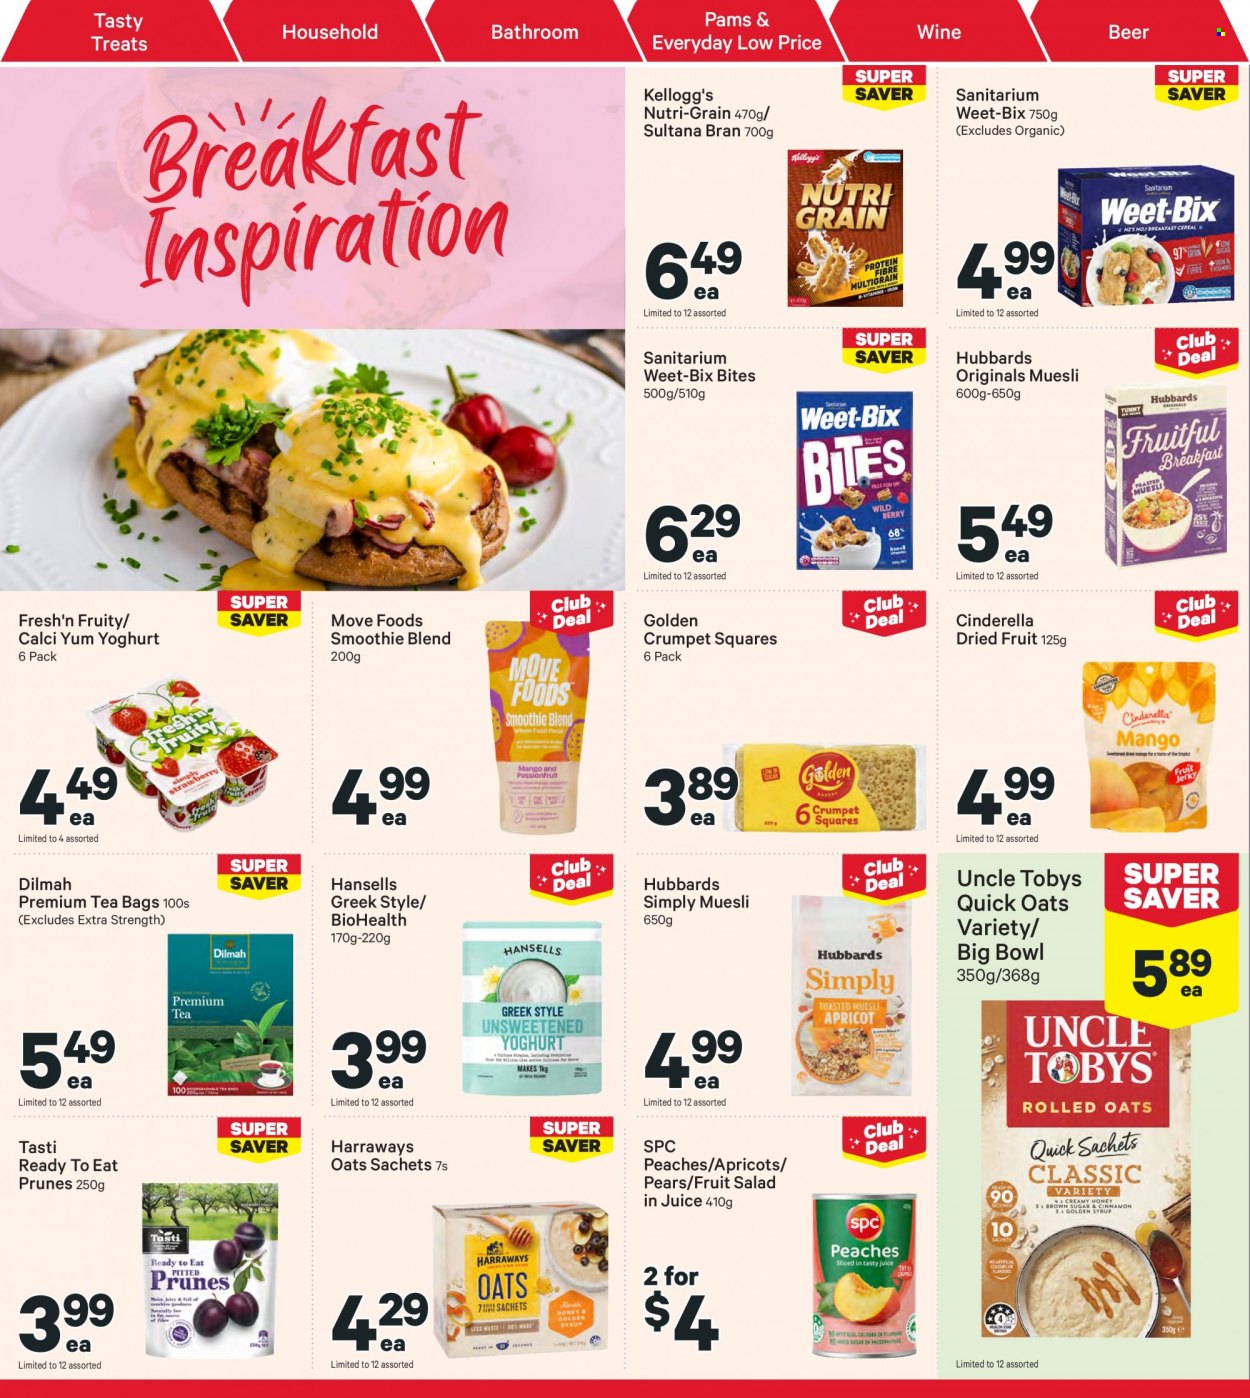 thumbnail - New World mailer - 27.03.2023 - 02.04.2023 - Sales products - Golden Crumpet, pears, apricots, peaches, yoghurt, Fresh'n Fruity, cereal bar, Kellogg's, crumpet squares, oats, fruit salad, Weet-Bix, muesli, Quick Oats, Nutri-Grain, prunes, dried fruit, juice, smoothie, tea bags, wine, beer, bowl. Page 14.